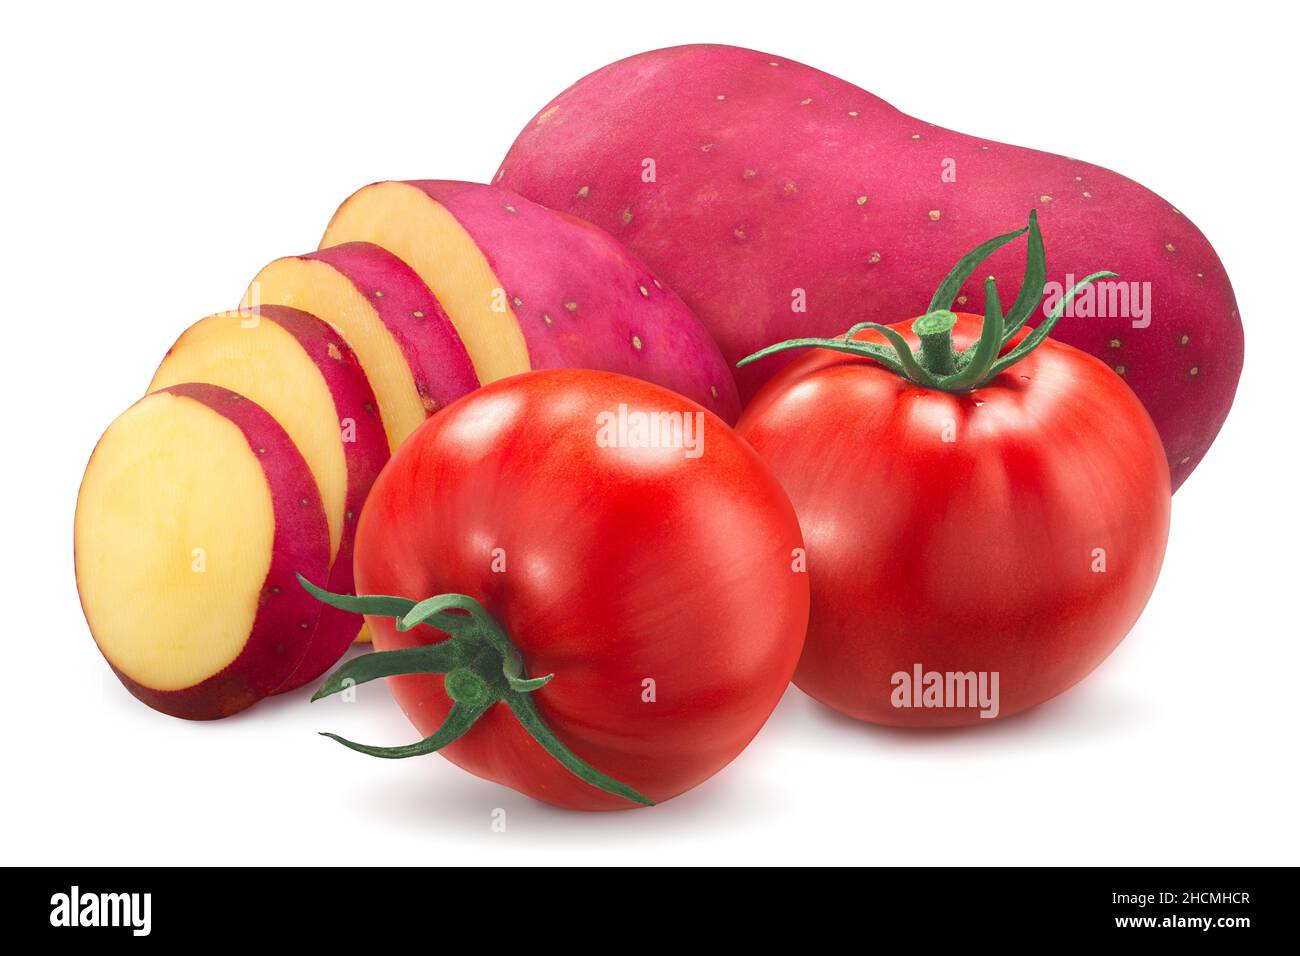 Red potato and tomatoes isolated Stock Photo